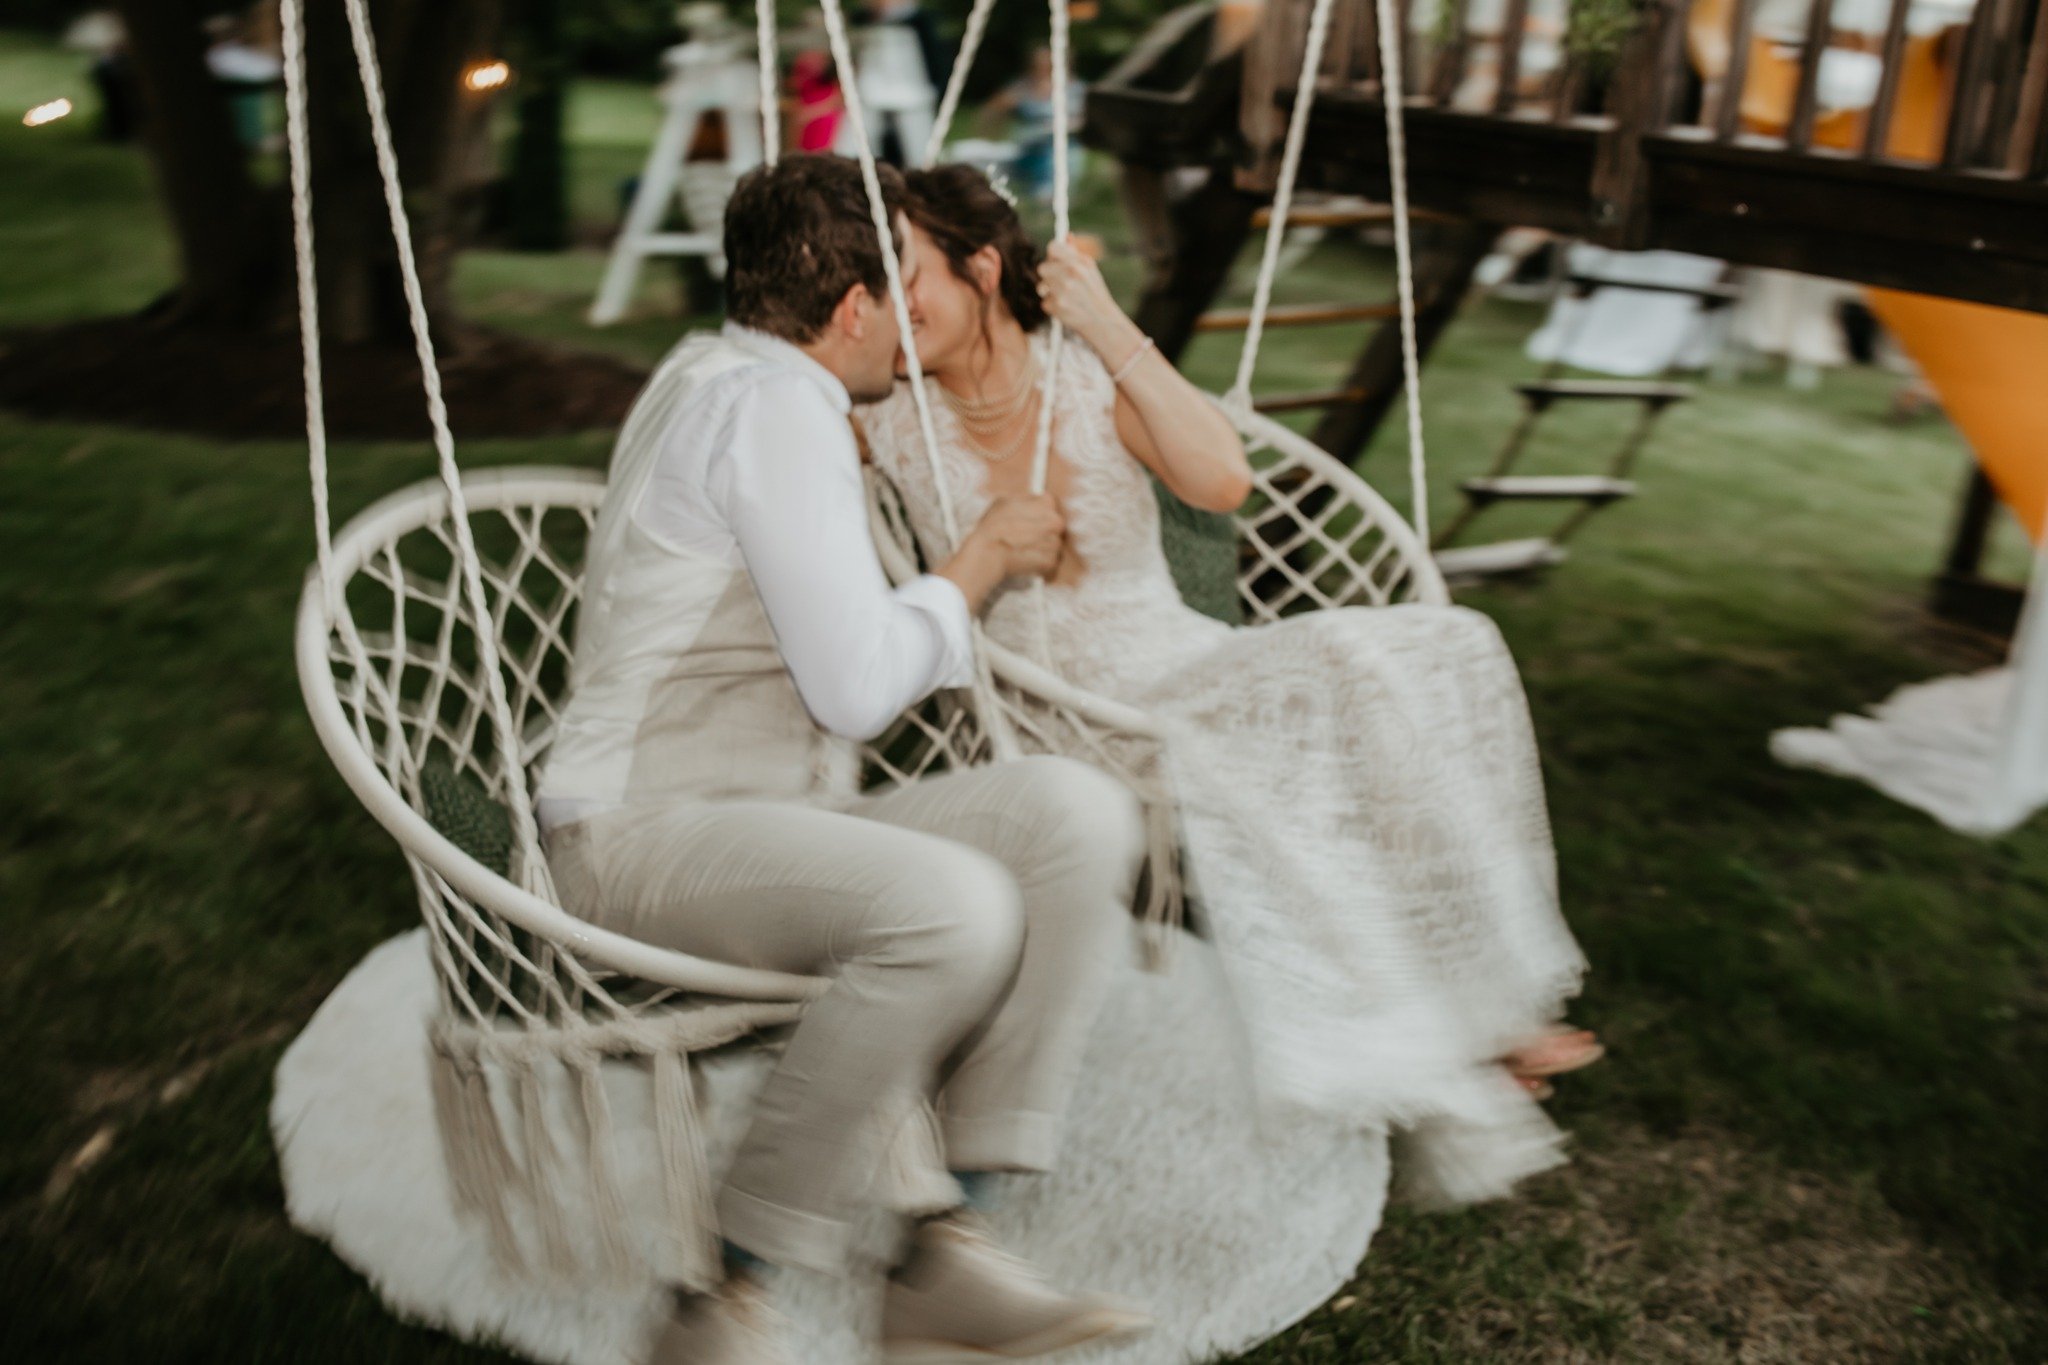 Crafting your dream wedding decor can be a delightful journey! 🌟 

Remember, DIY projects should add joy, not stress. If you find yourself overwhelmed, don't hesitate to simplify or call in the pros for a helping hand. Your wedding day should be fil